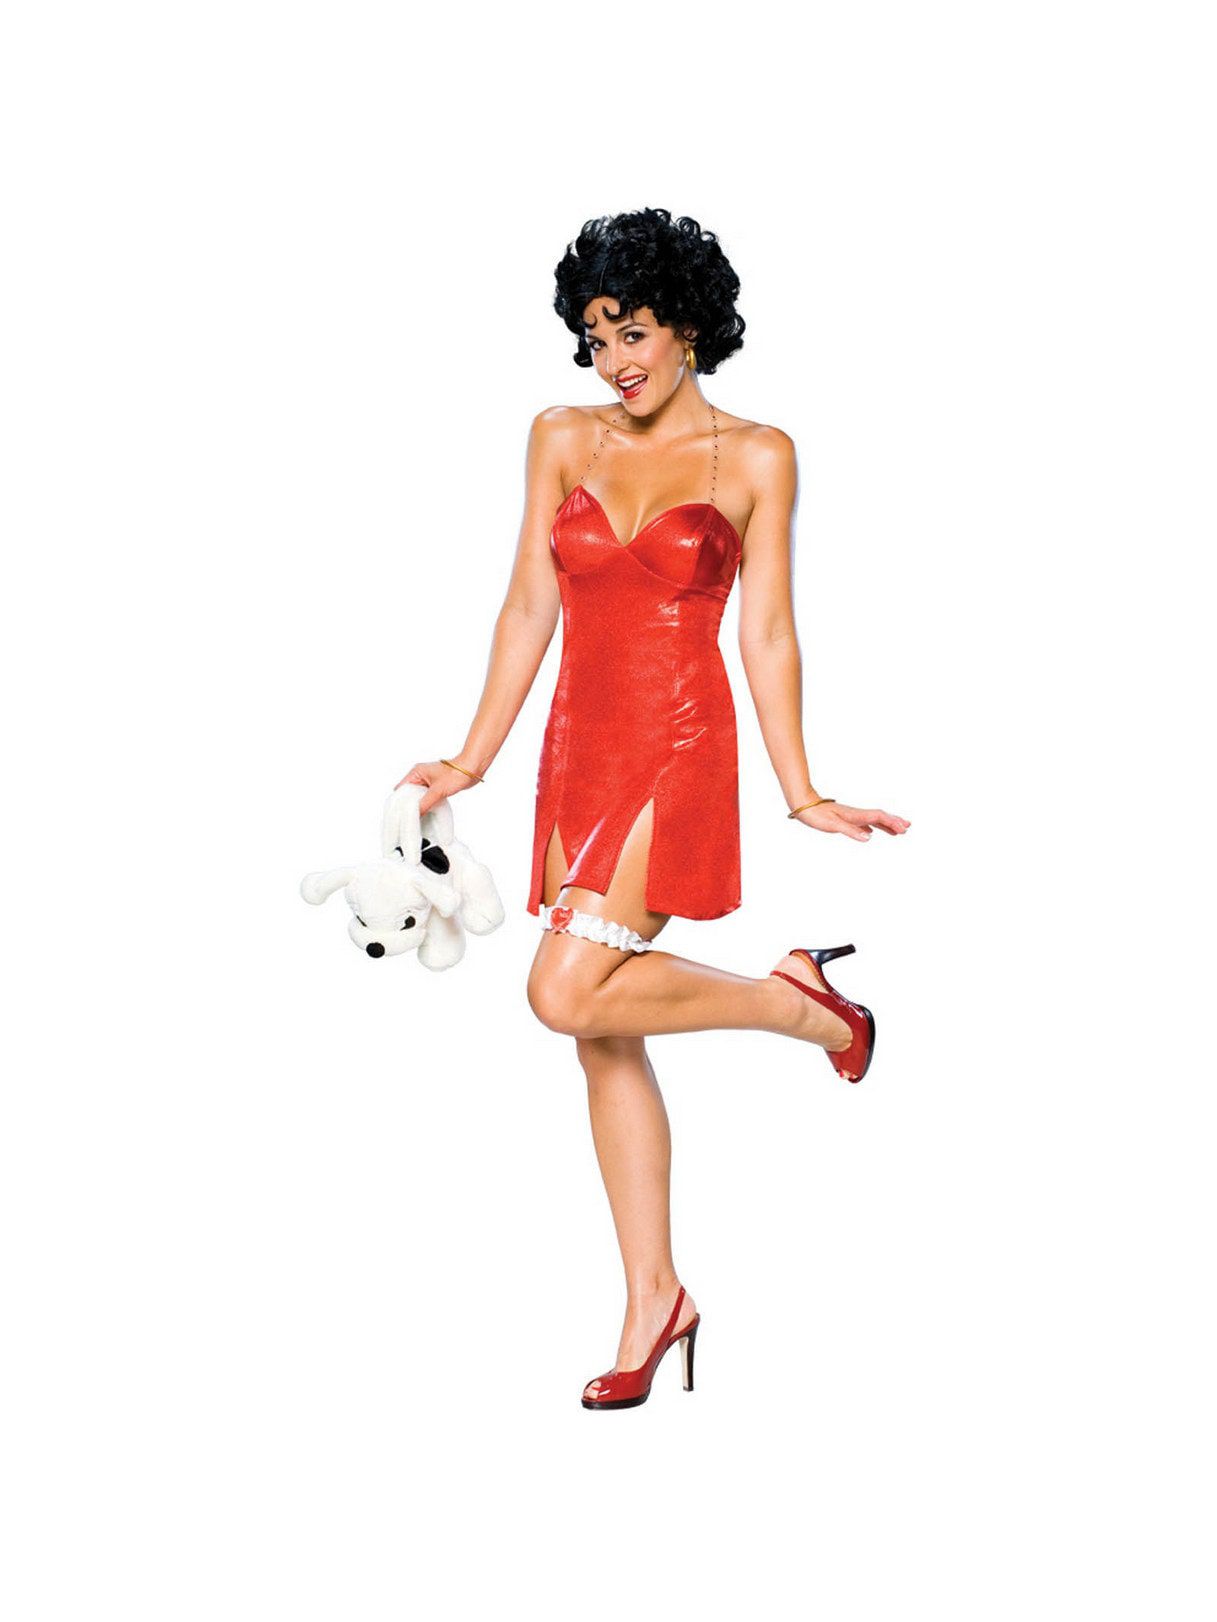 Betty Boop Deluxe Short Dress Adult Costume - image 1 of 1